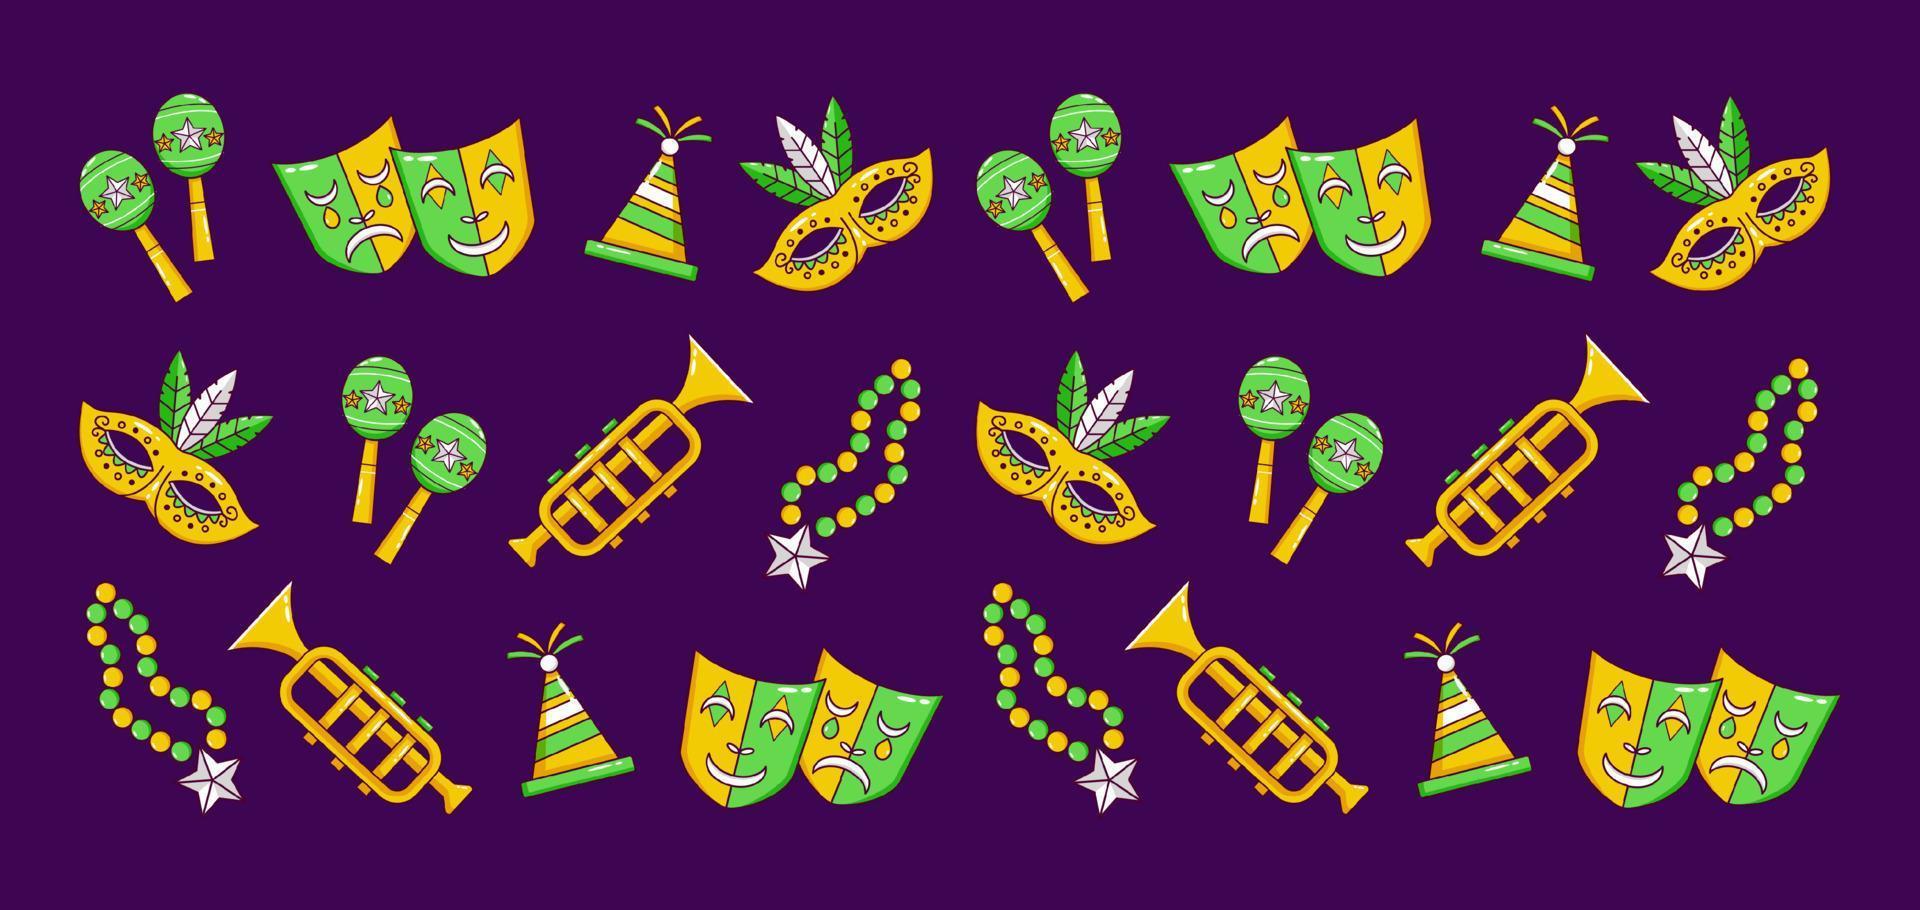 Mardi Gras Carnival. Mask, trumpet, necklace, maracas and party hat icon pattern vector